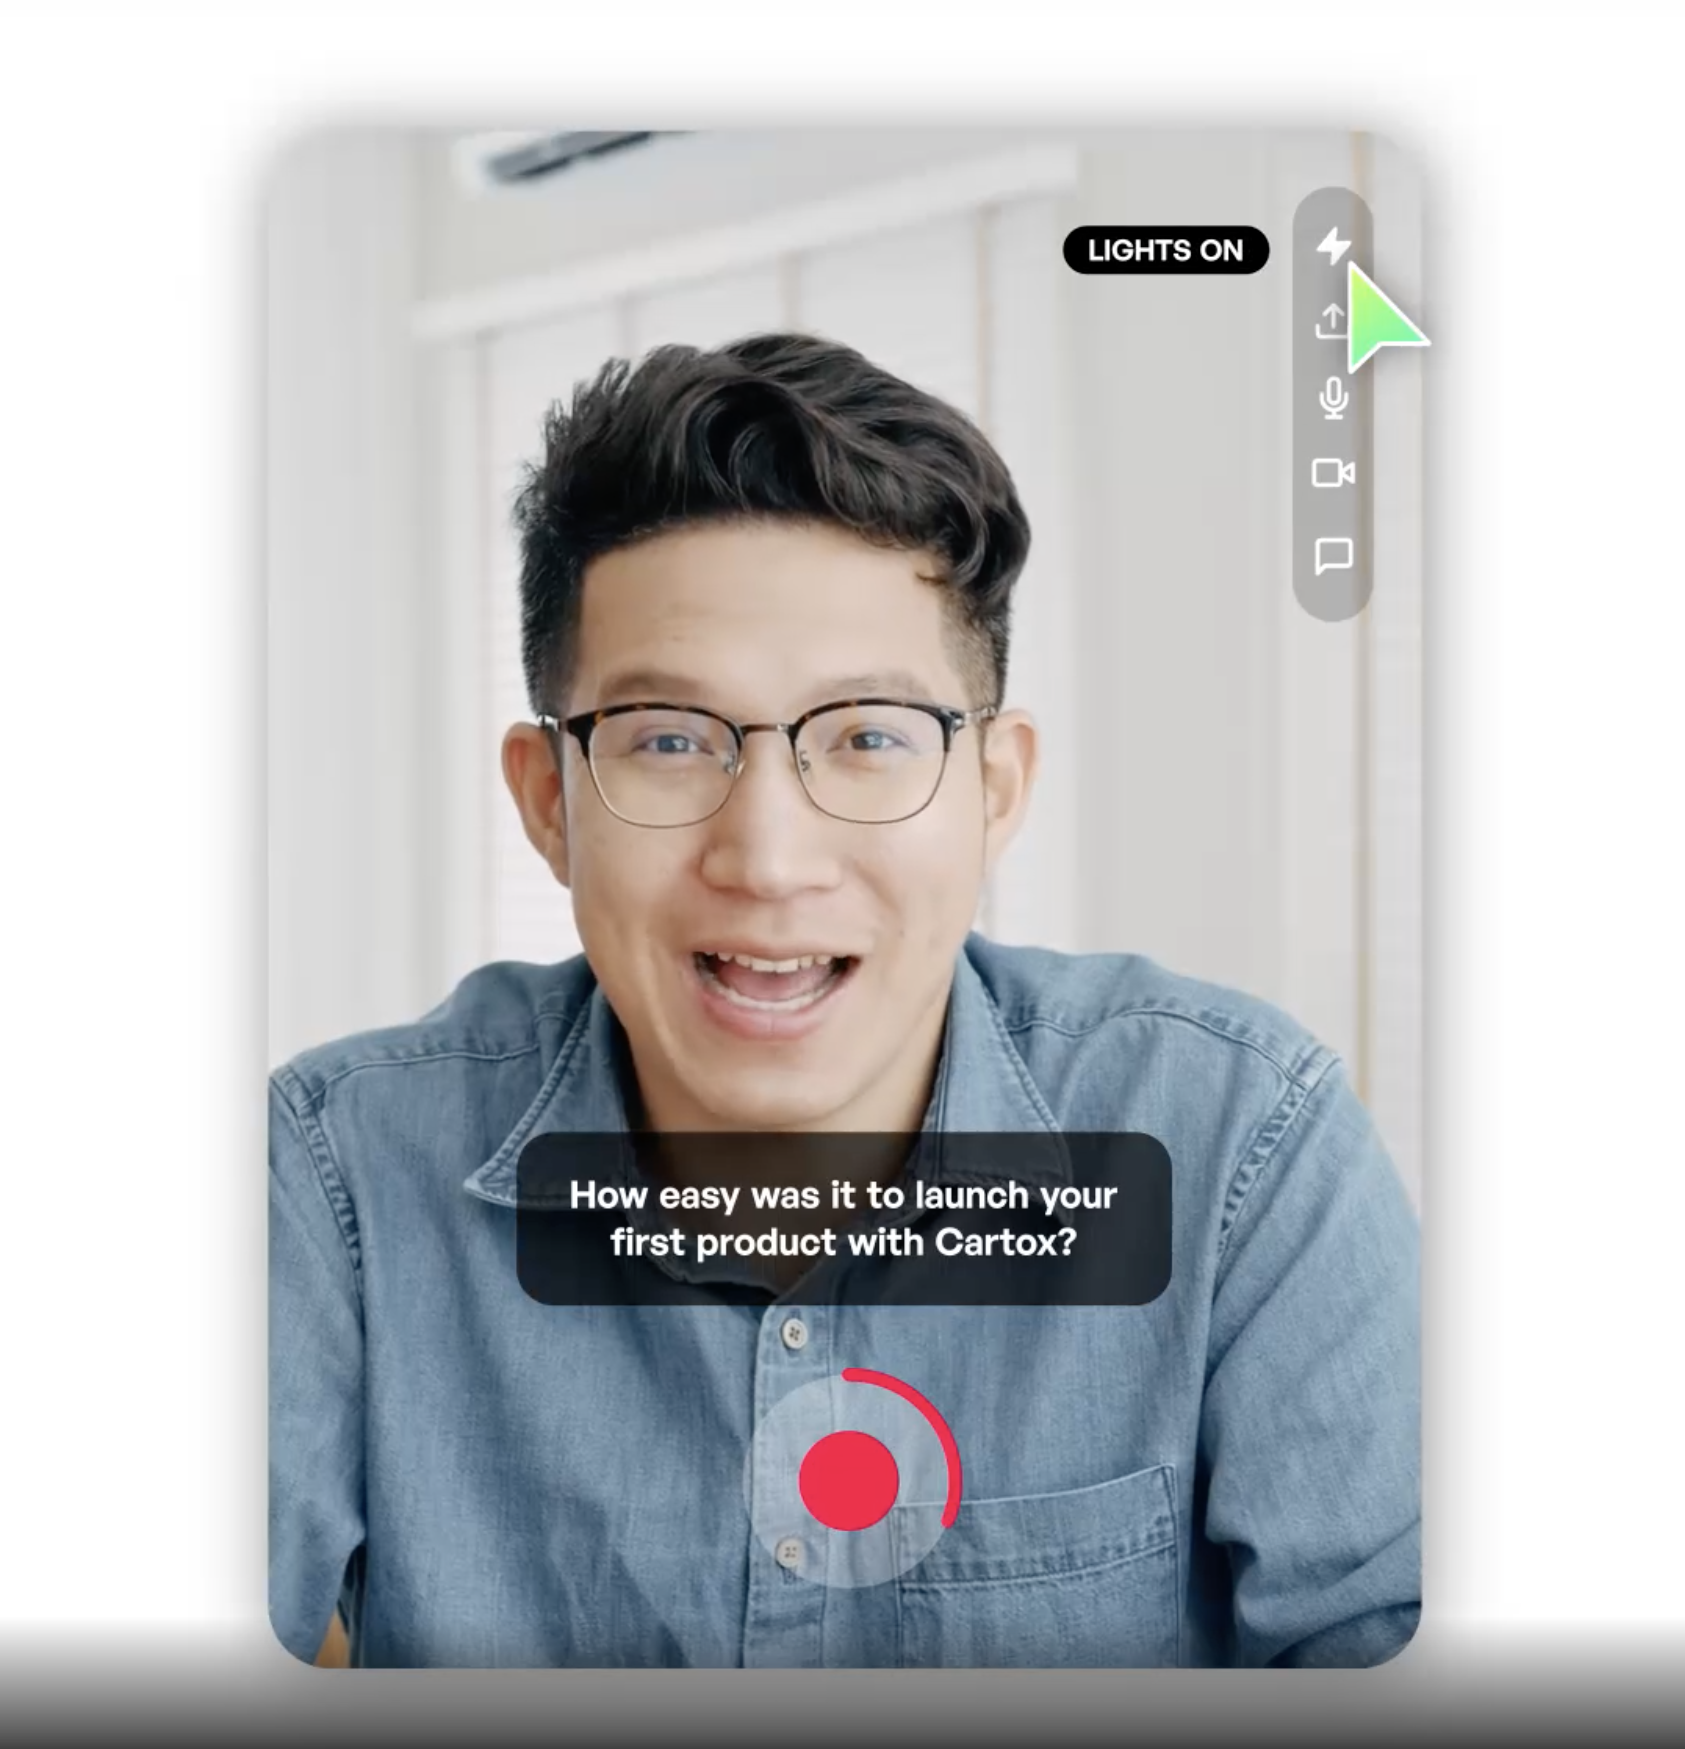 Capture video content from anyone, anywhere with our built-in recorder. It works on any camera-enabled device, and features an intuitive countdown, easy prompts, flash, upload, and more.